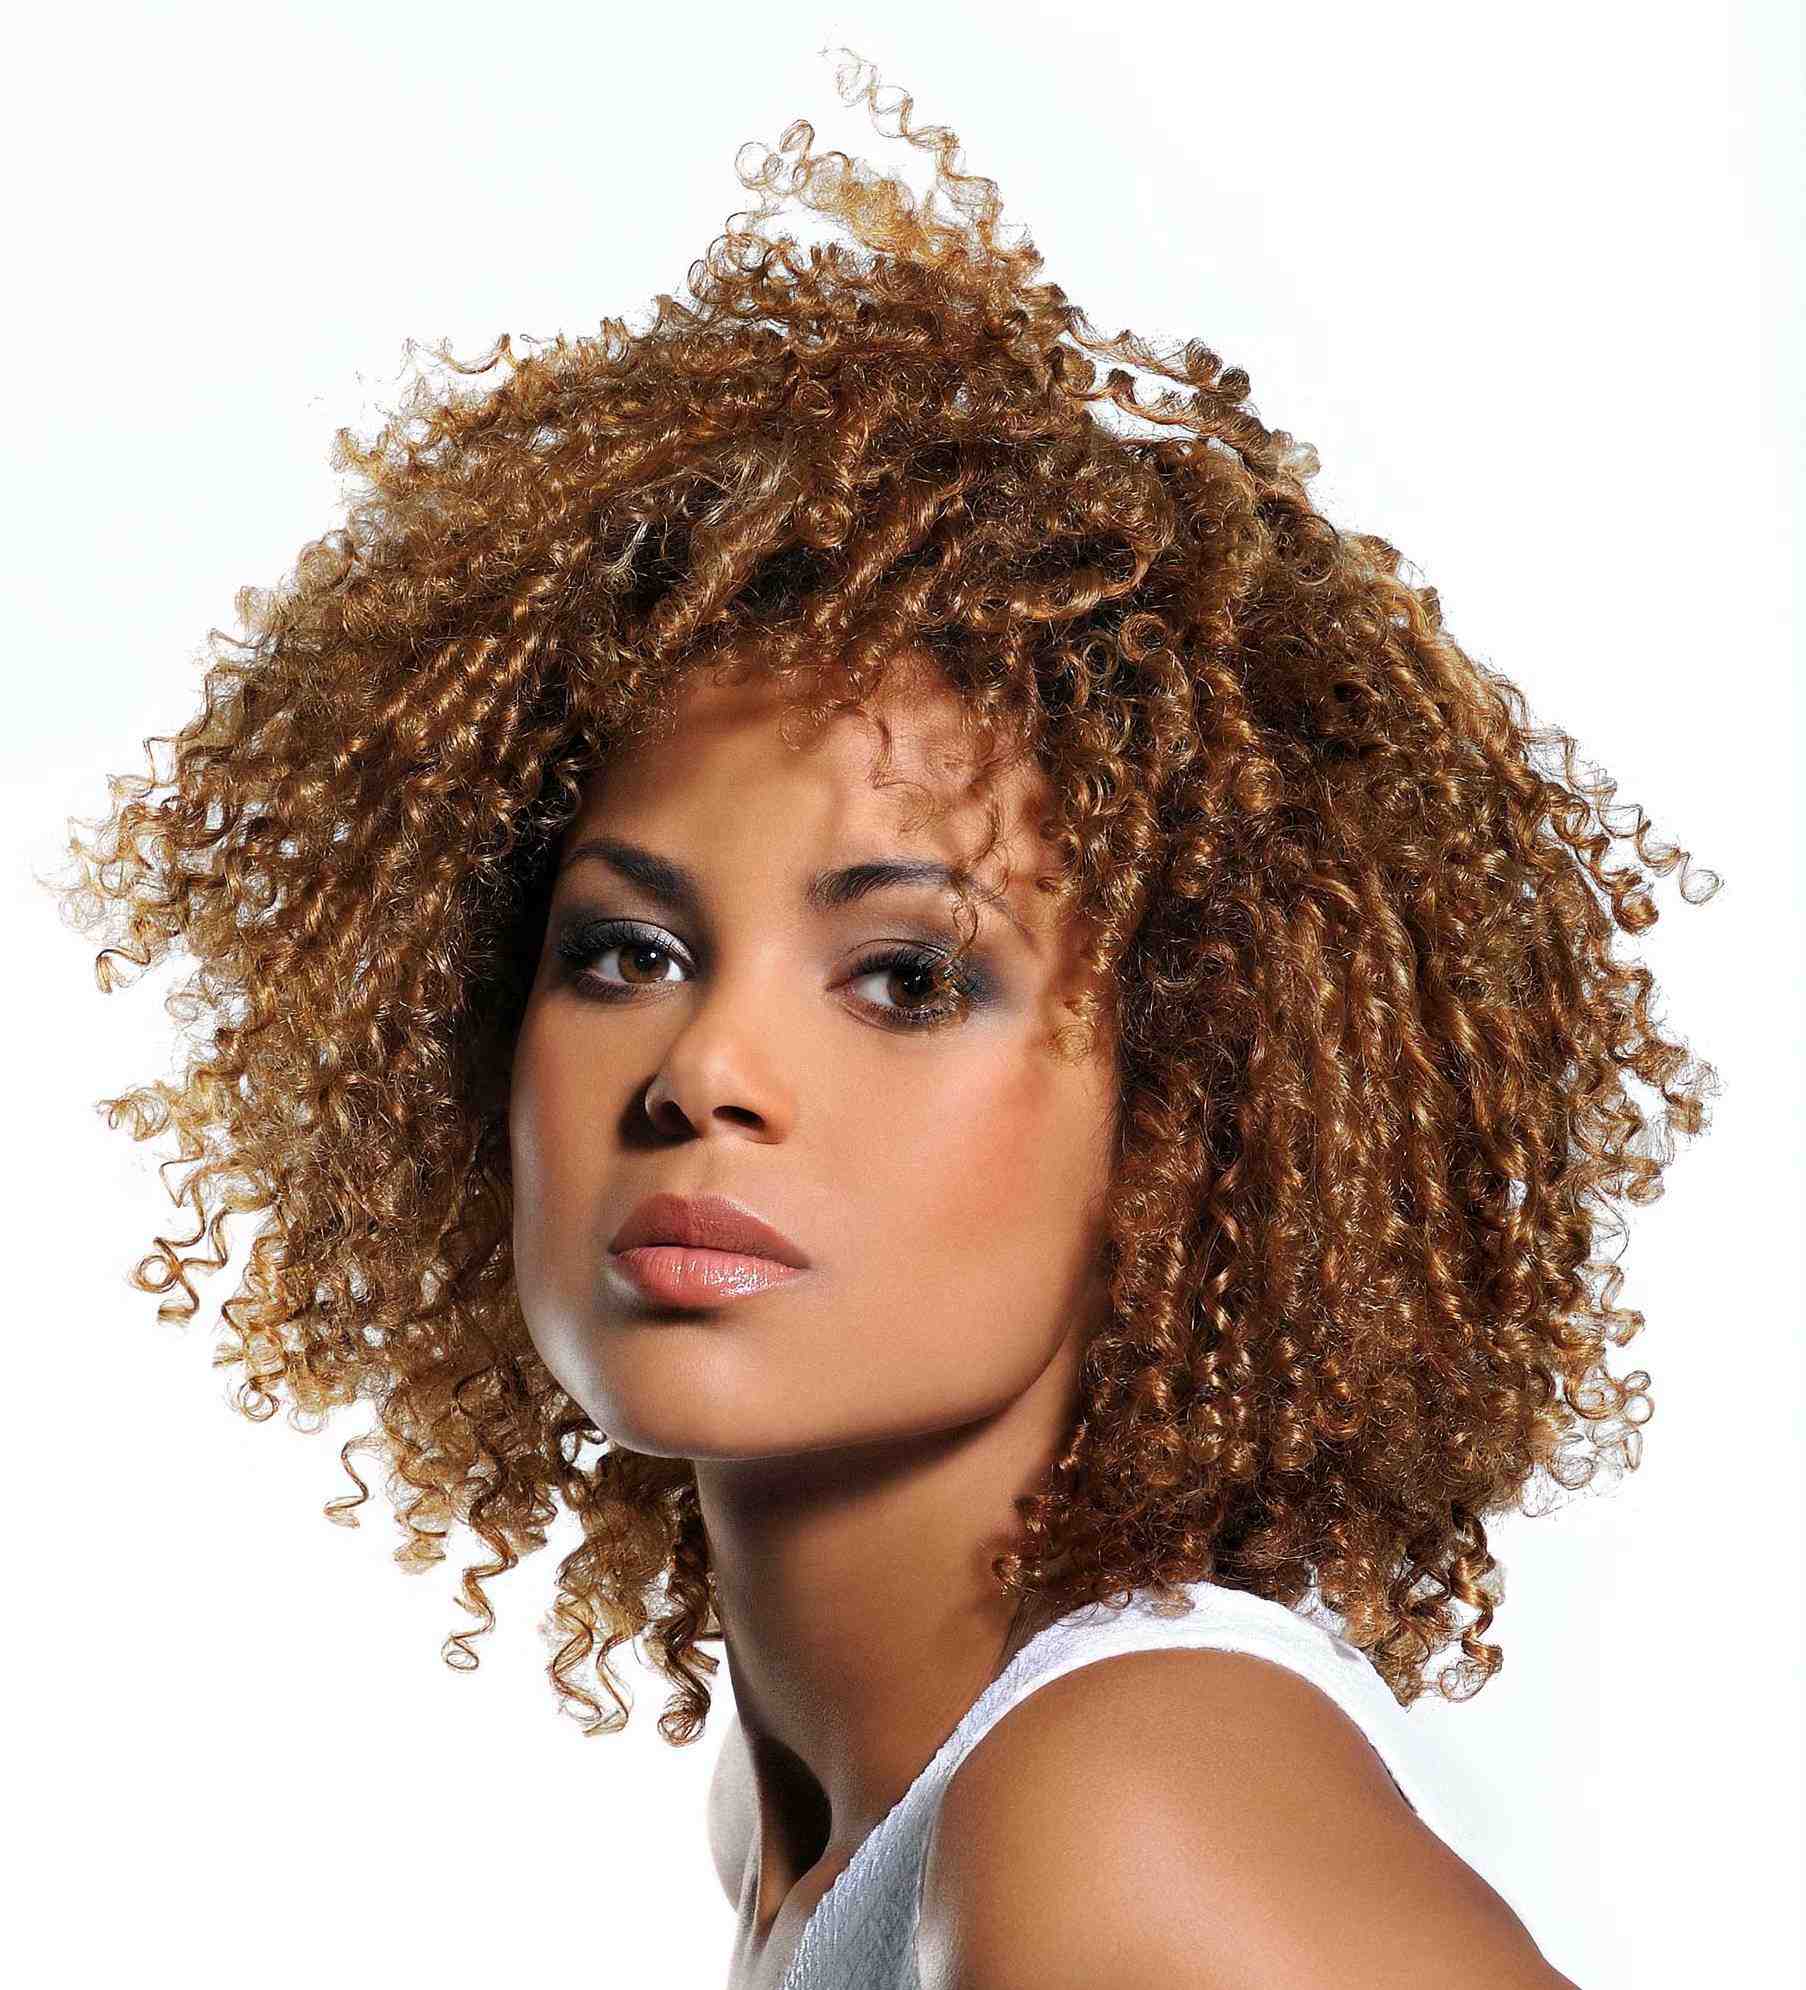 Keep Calm & Keep It Curly: Try These Curly Hair Care Tips | @FTER5 Beauty